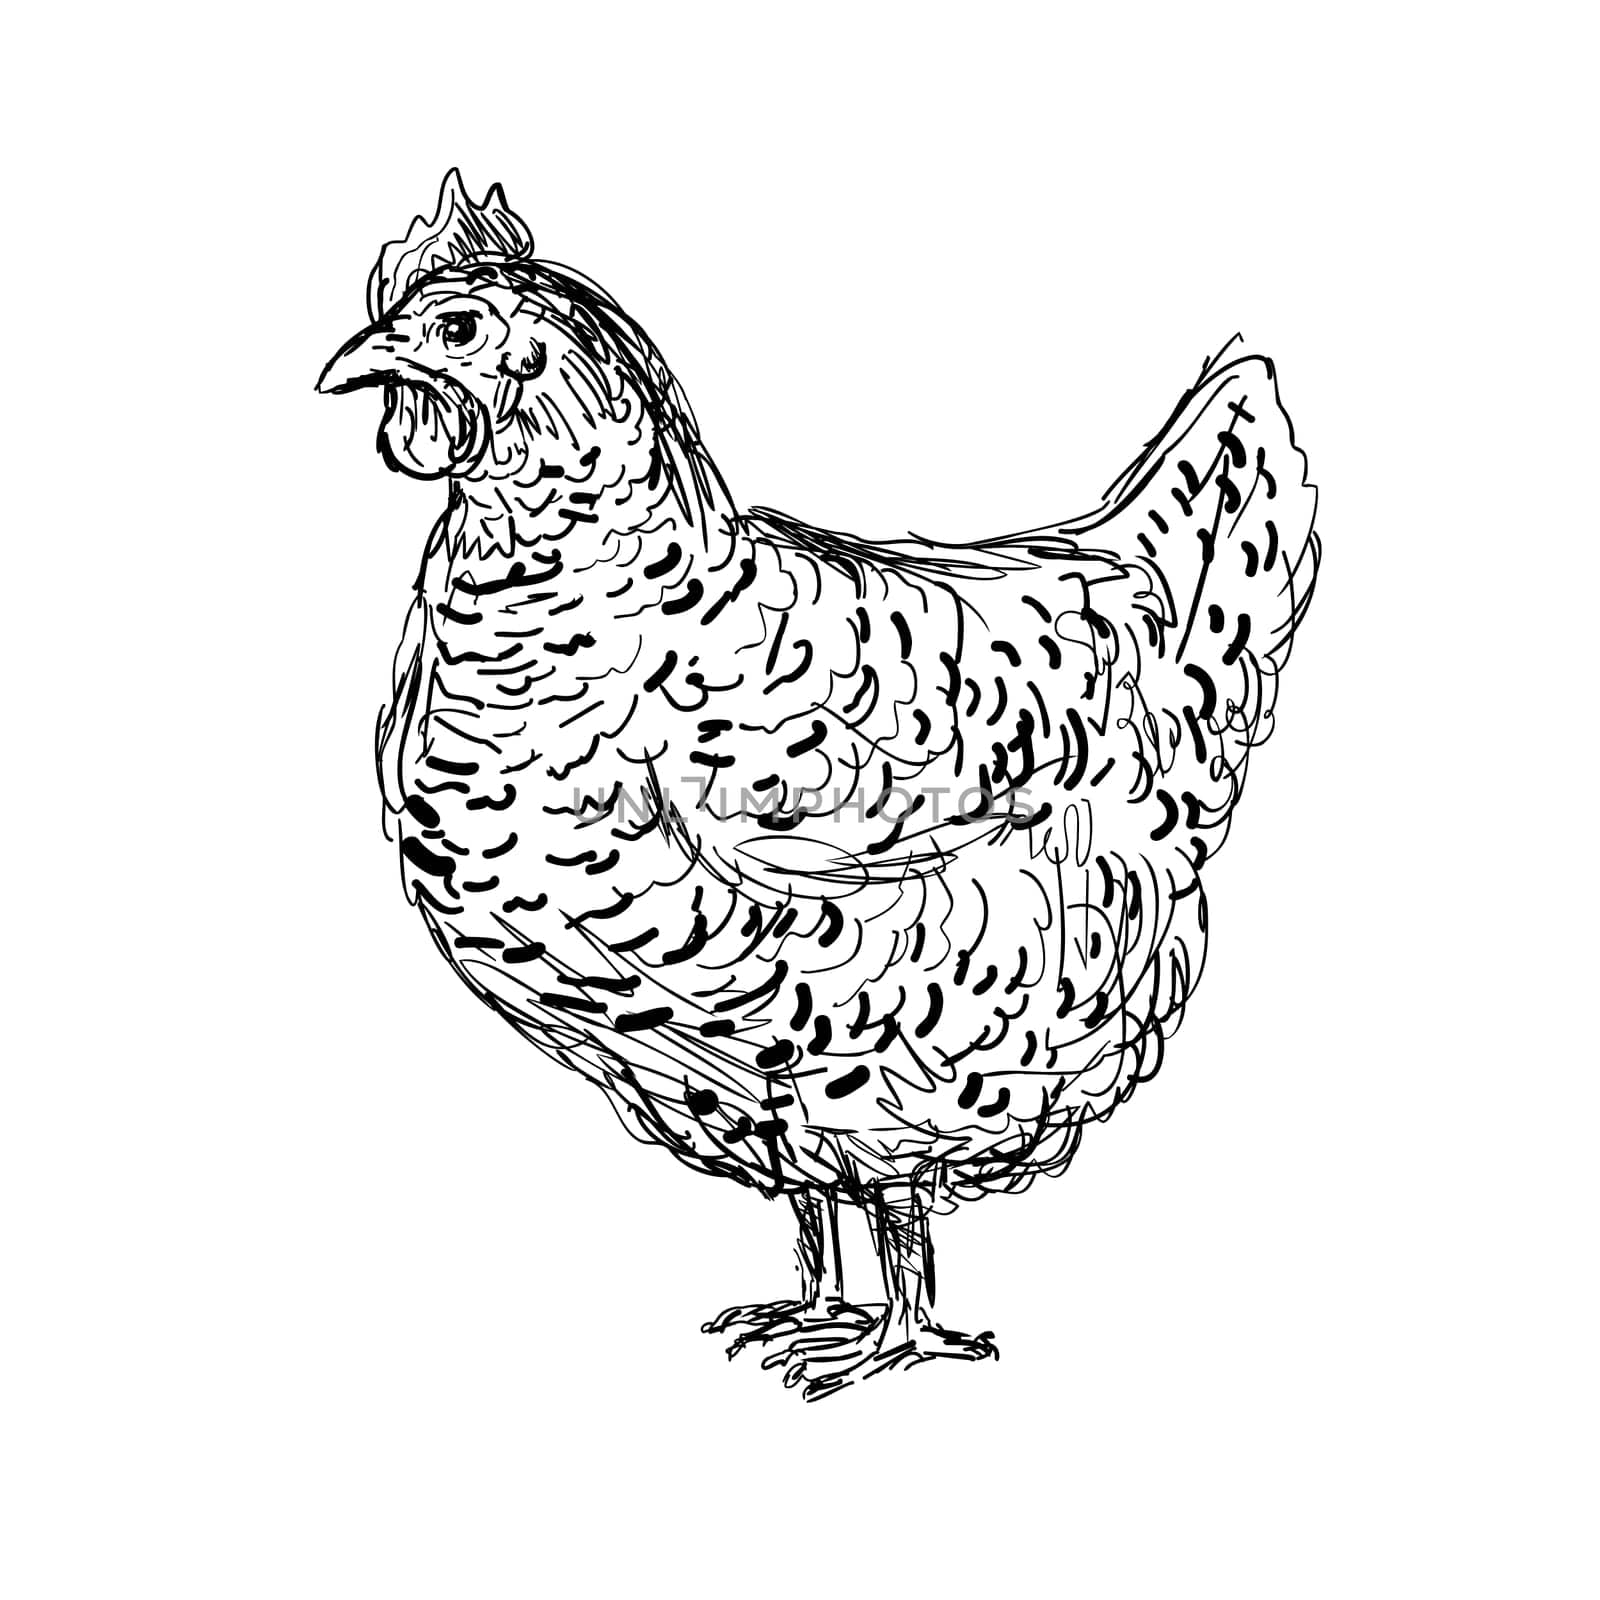 Drawing sketch style illustration of an Plymouth Rock, Rock, Barred Rock hen, an American breed of domestic chicken viewed from side on isolated white background done in black and white line art.
